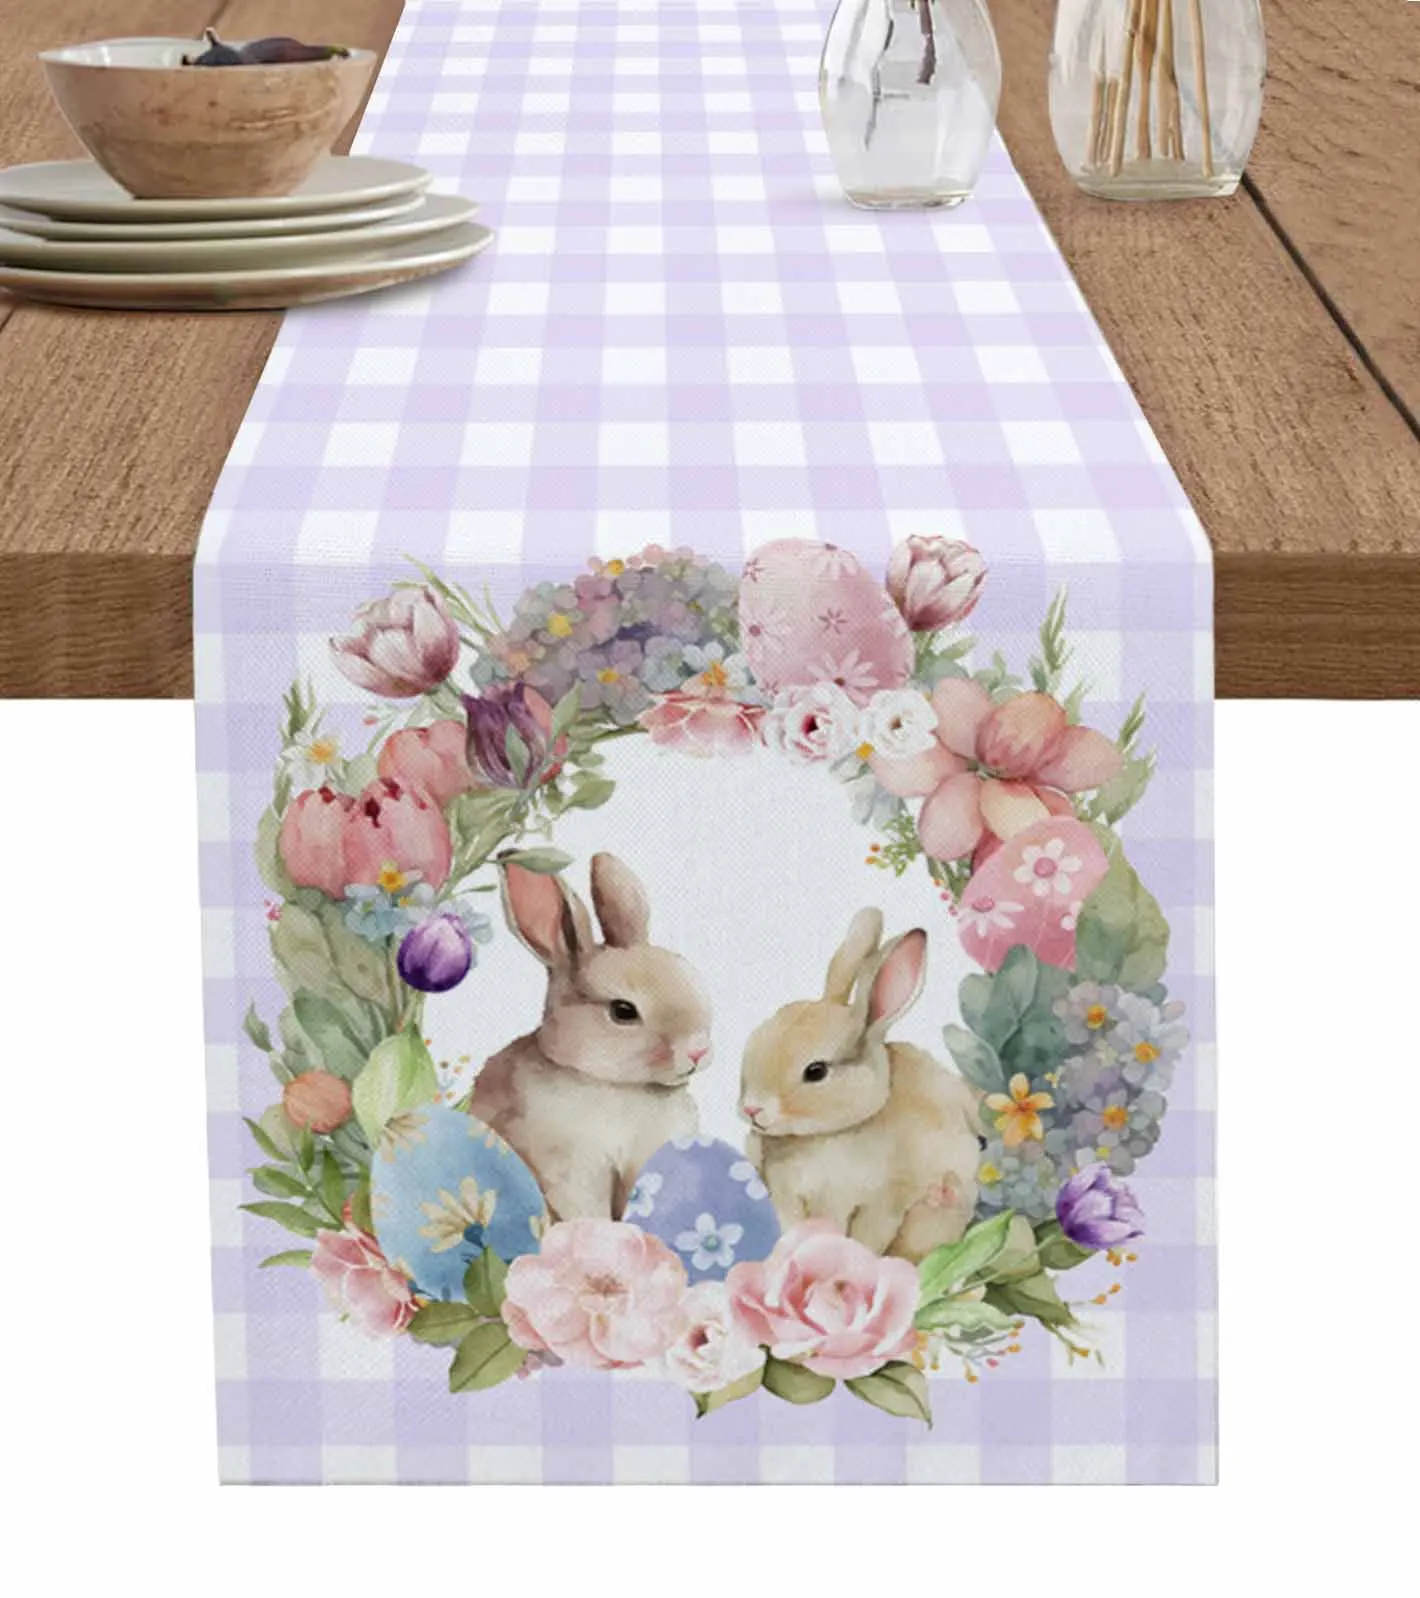 

Easter Rabbit Watercolor Flower Table Runner For Kitchen Table Cover Home Decor Tablecloth 4/6 Pcs Placemats